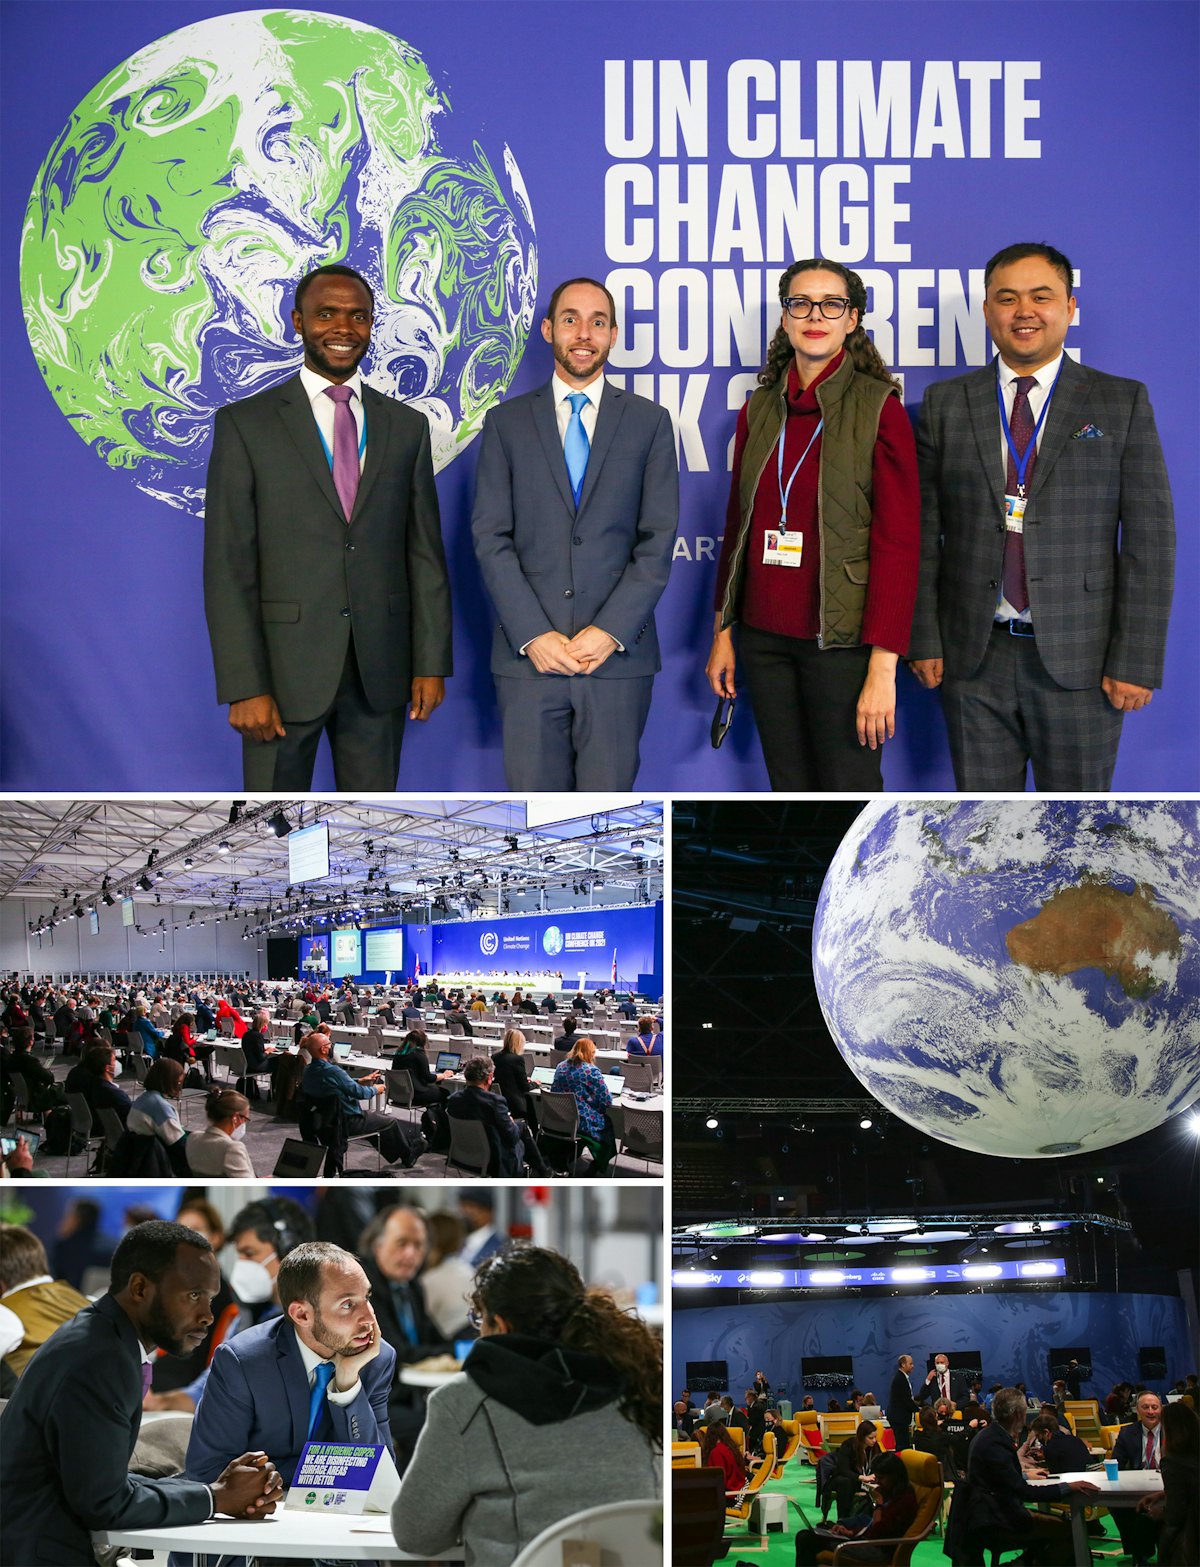 Representatives of the Bahá’í International Community participated in discussions at the COP26 climate summit, exploring the moral dimensions of climate action.